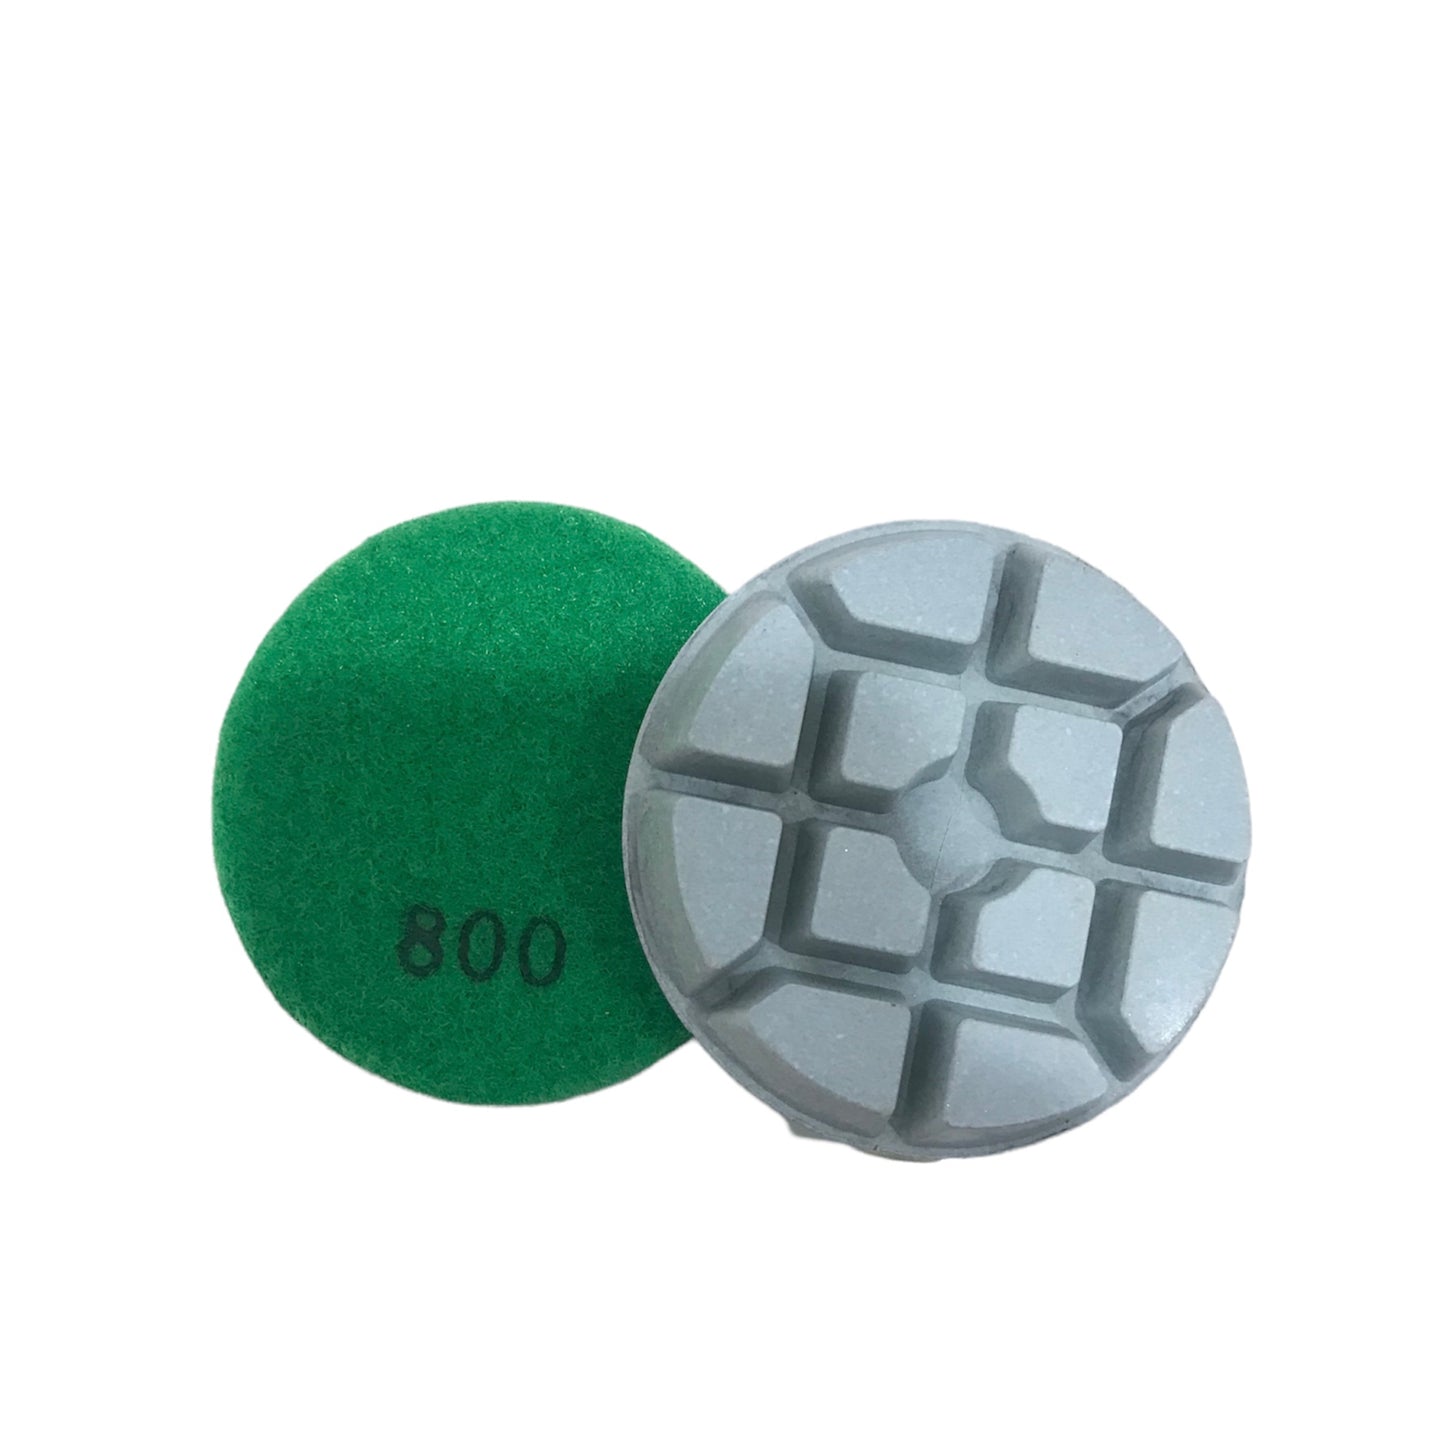 Concrete Polishing Pads with Velcro 3"